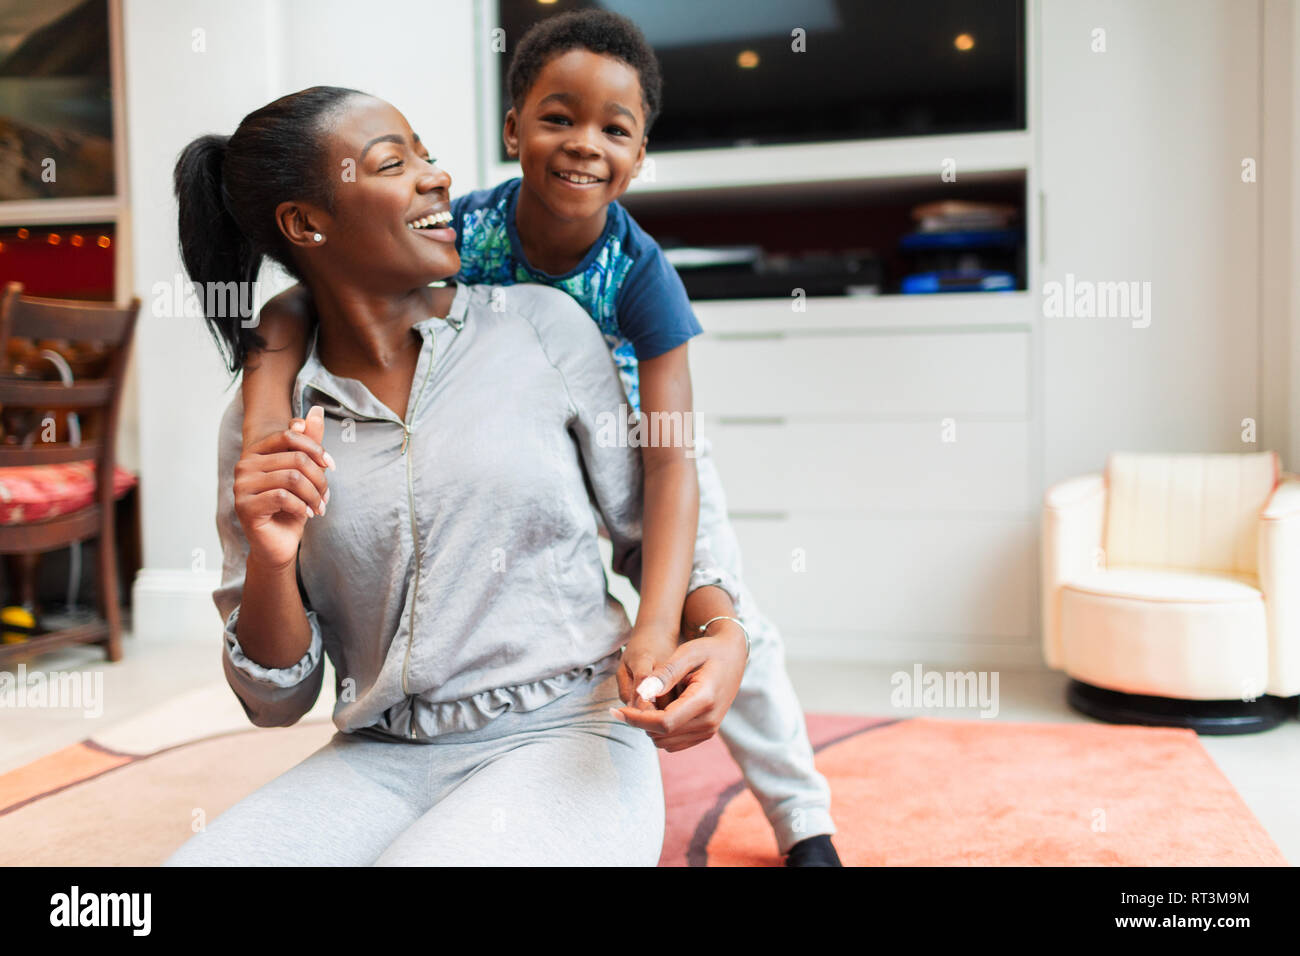 Portrait playful, happy mother and son in living room Stock Photo